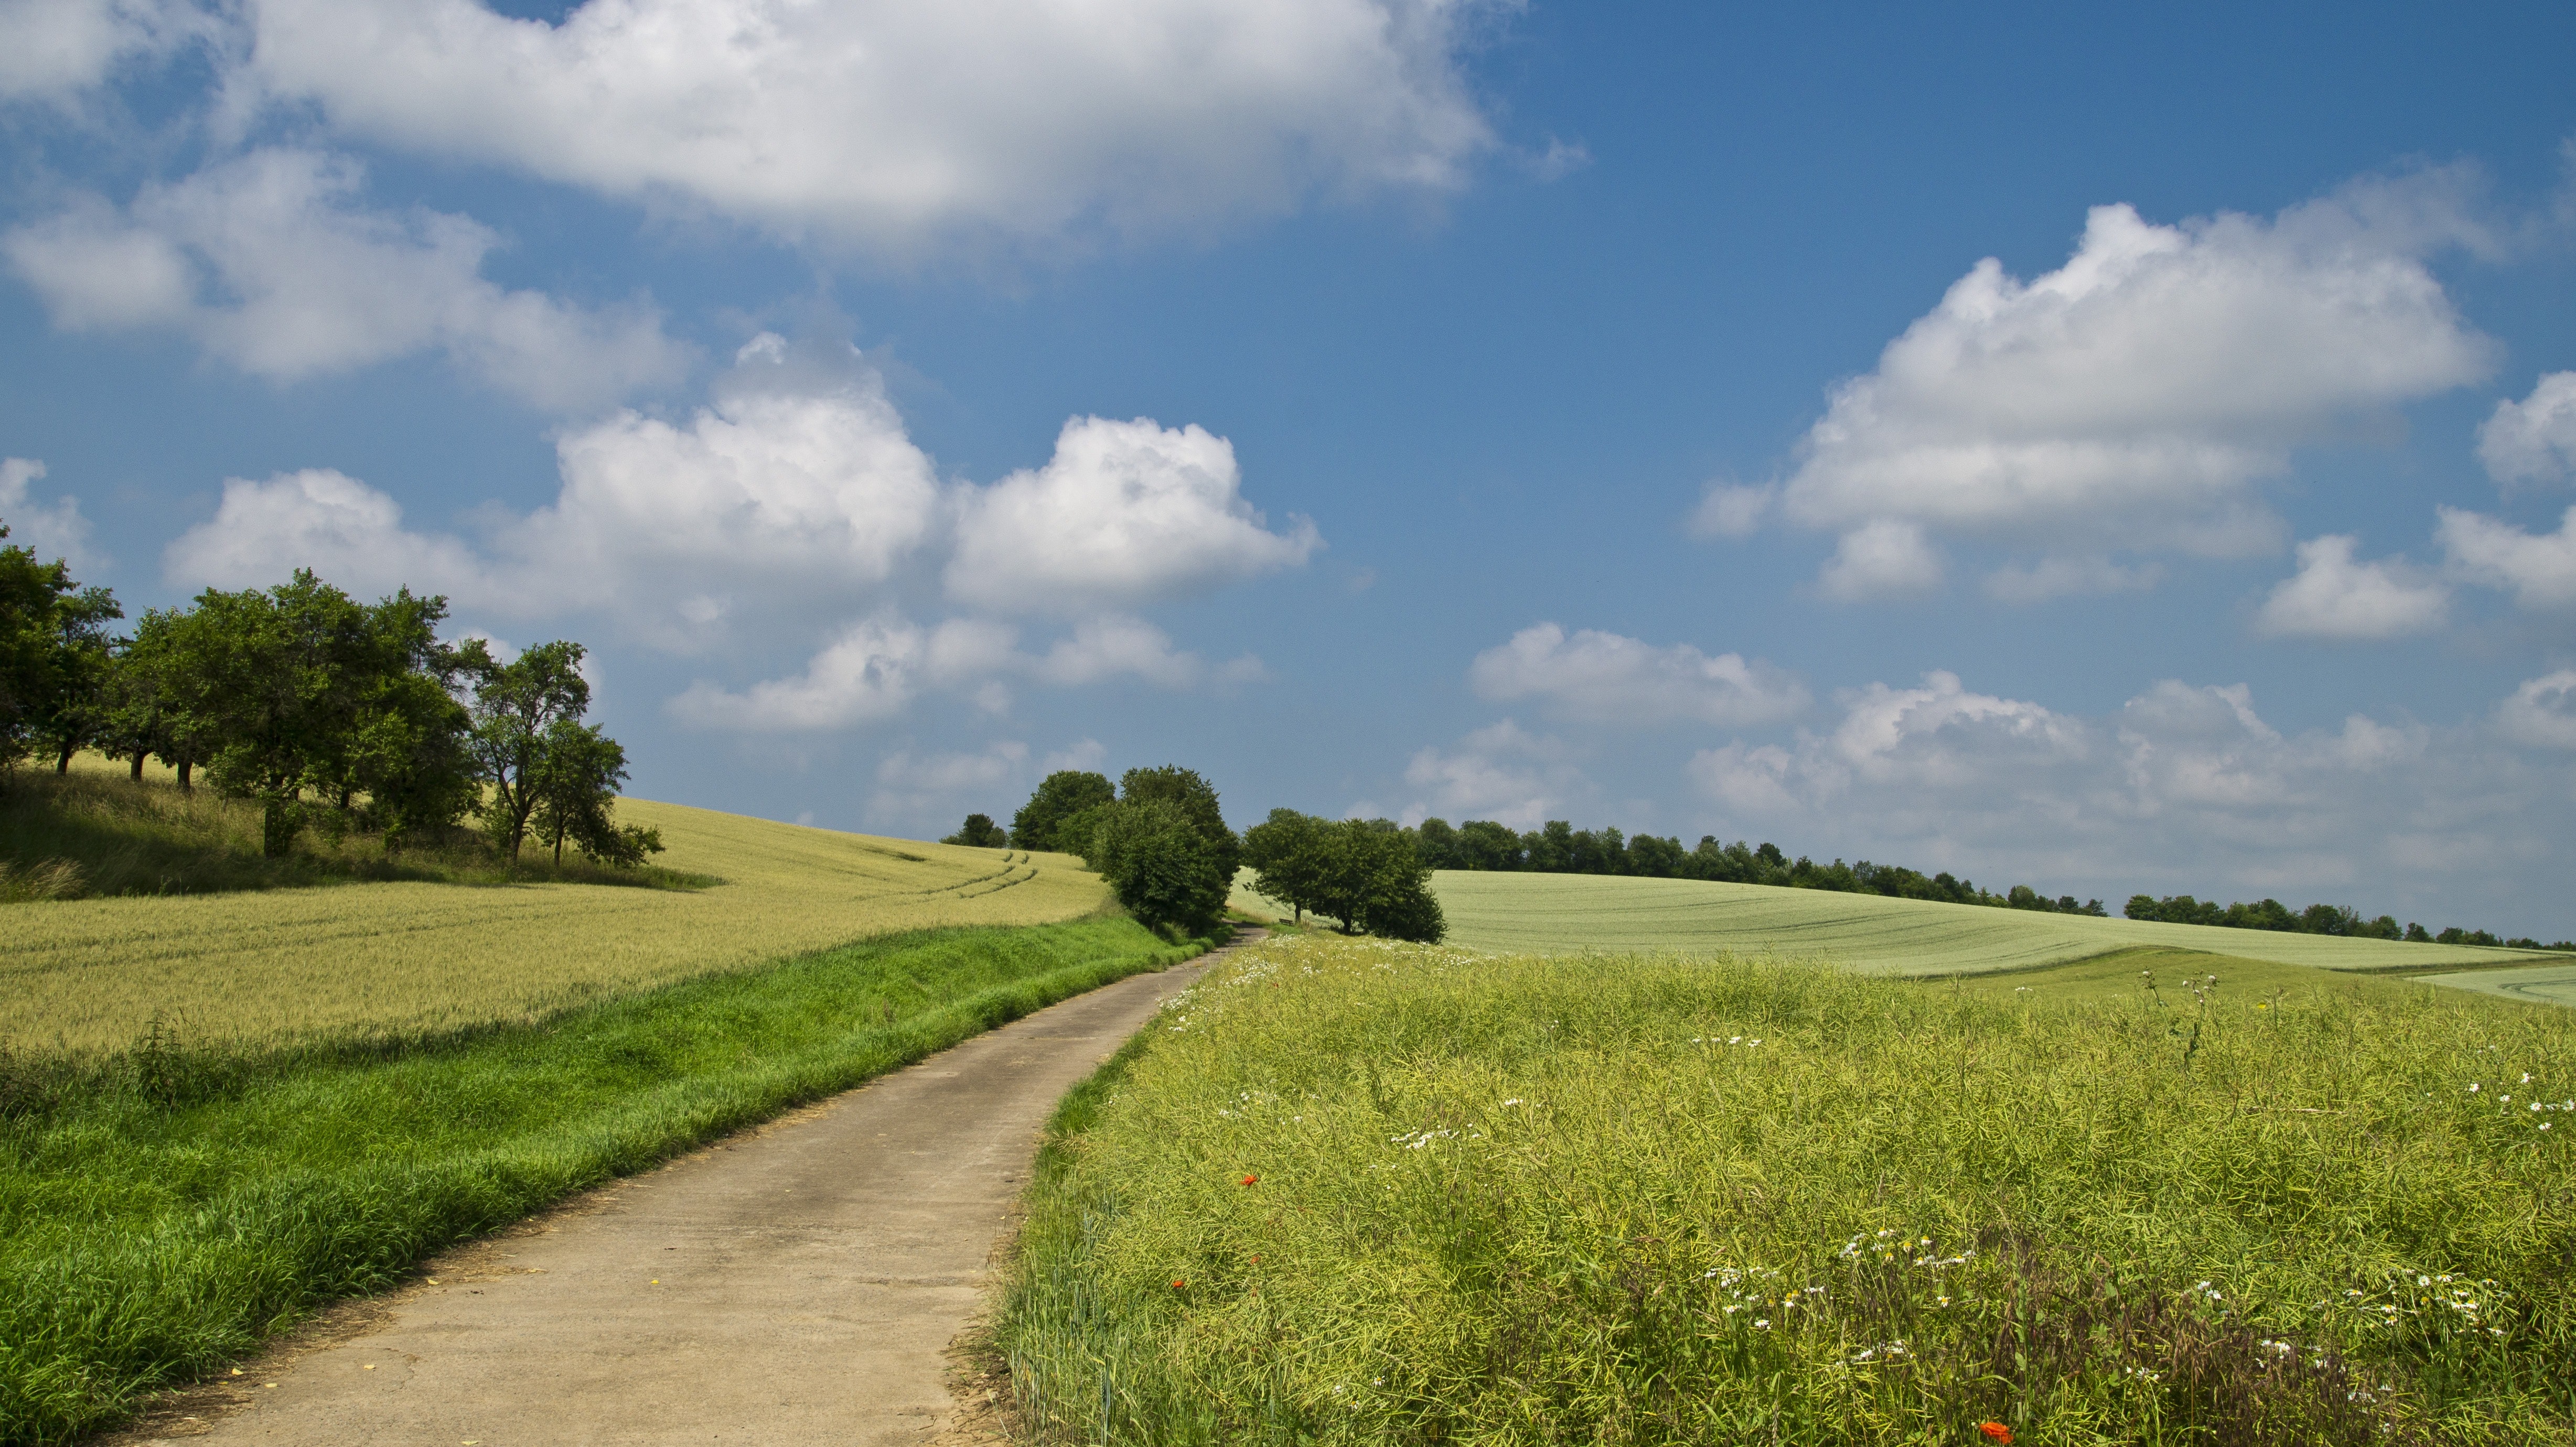 Pathway in Between of Green Grass Field, Clouds, Countryside, Field, Grass, HQ Photo